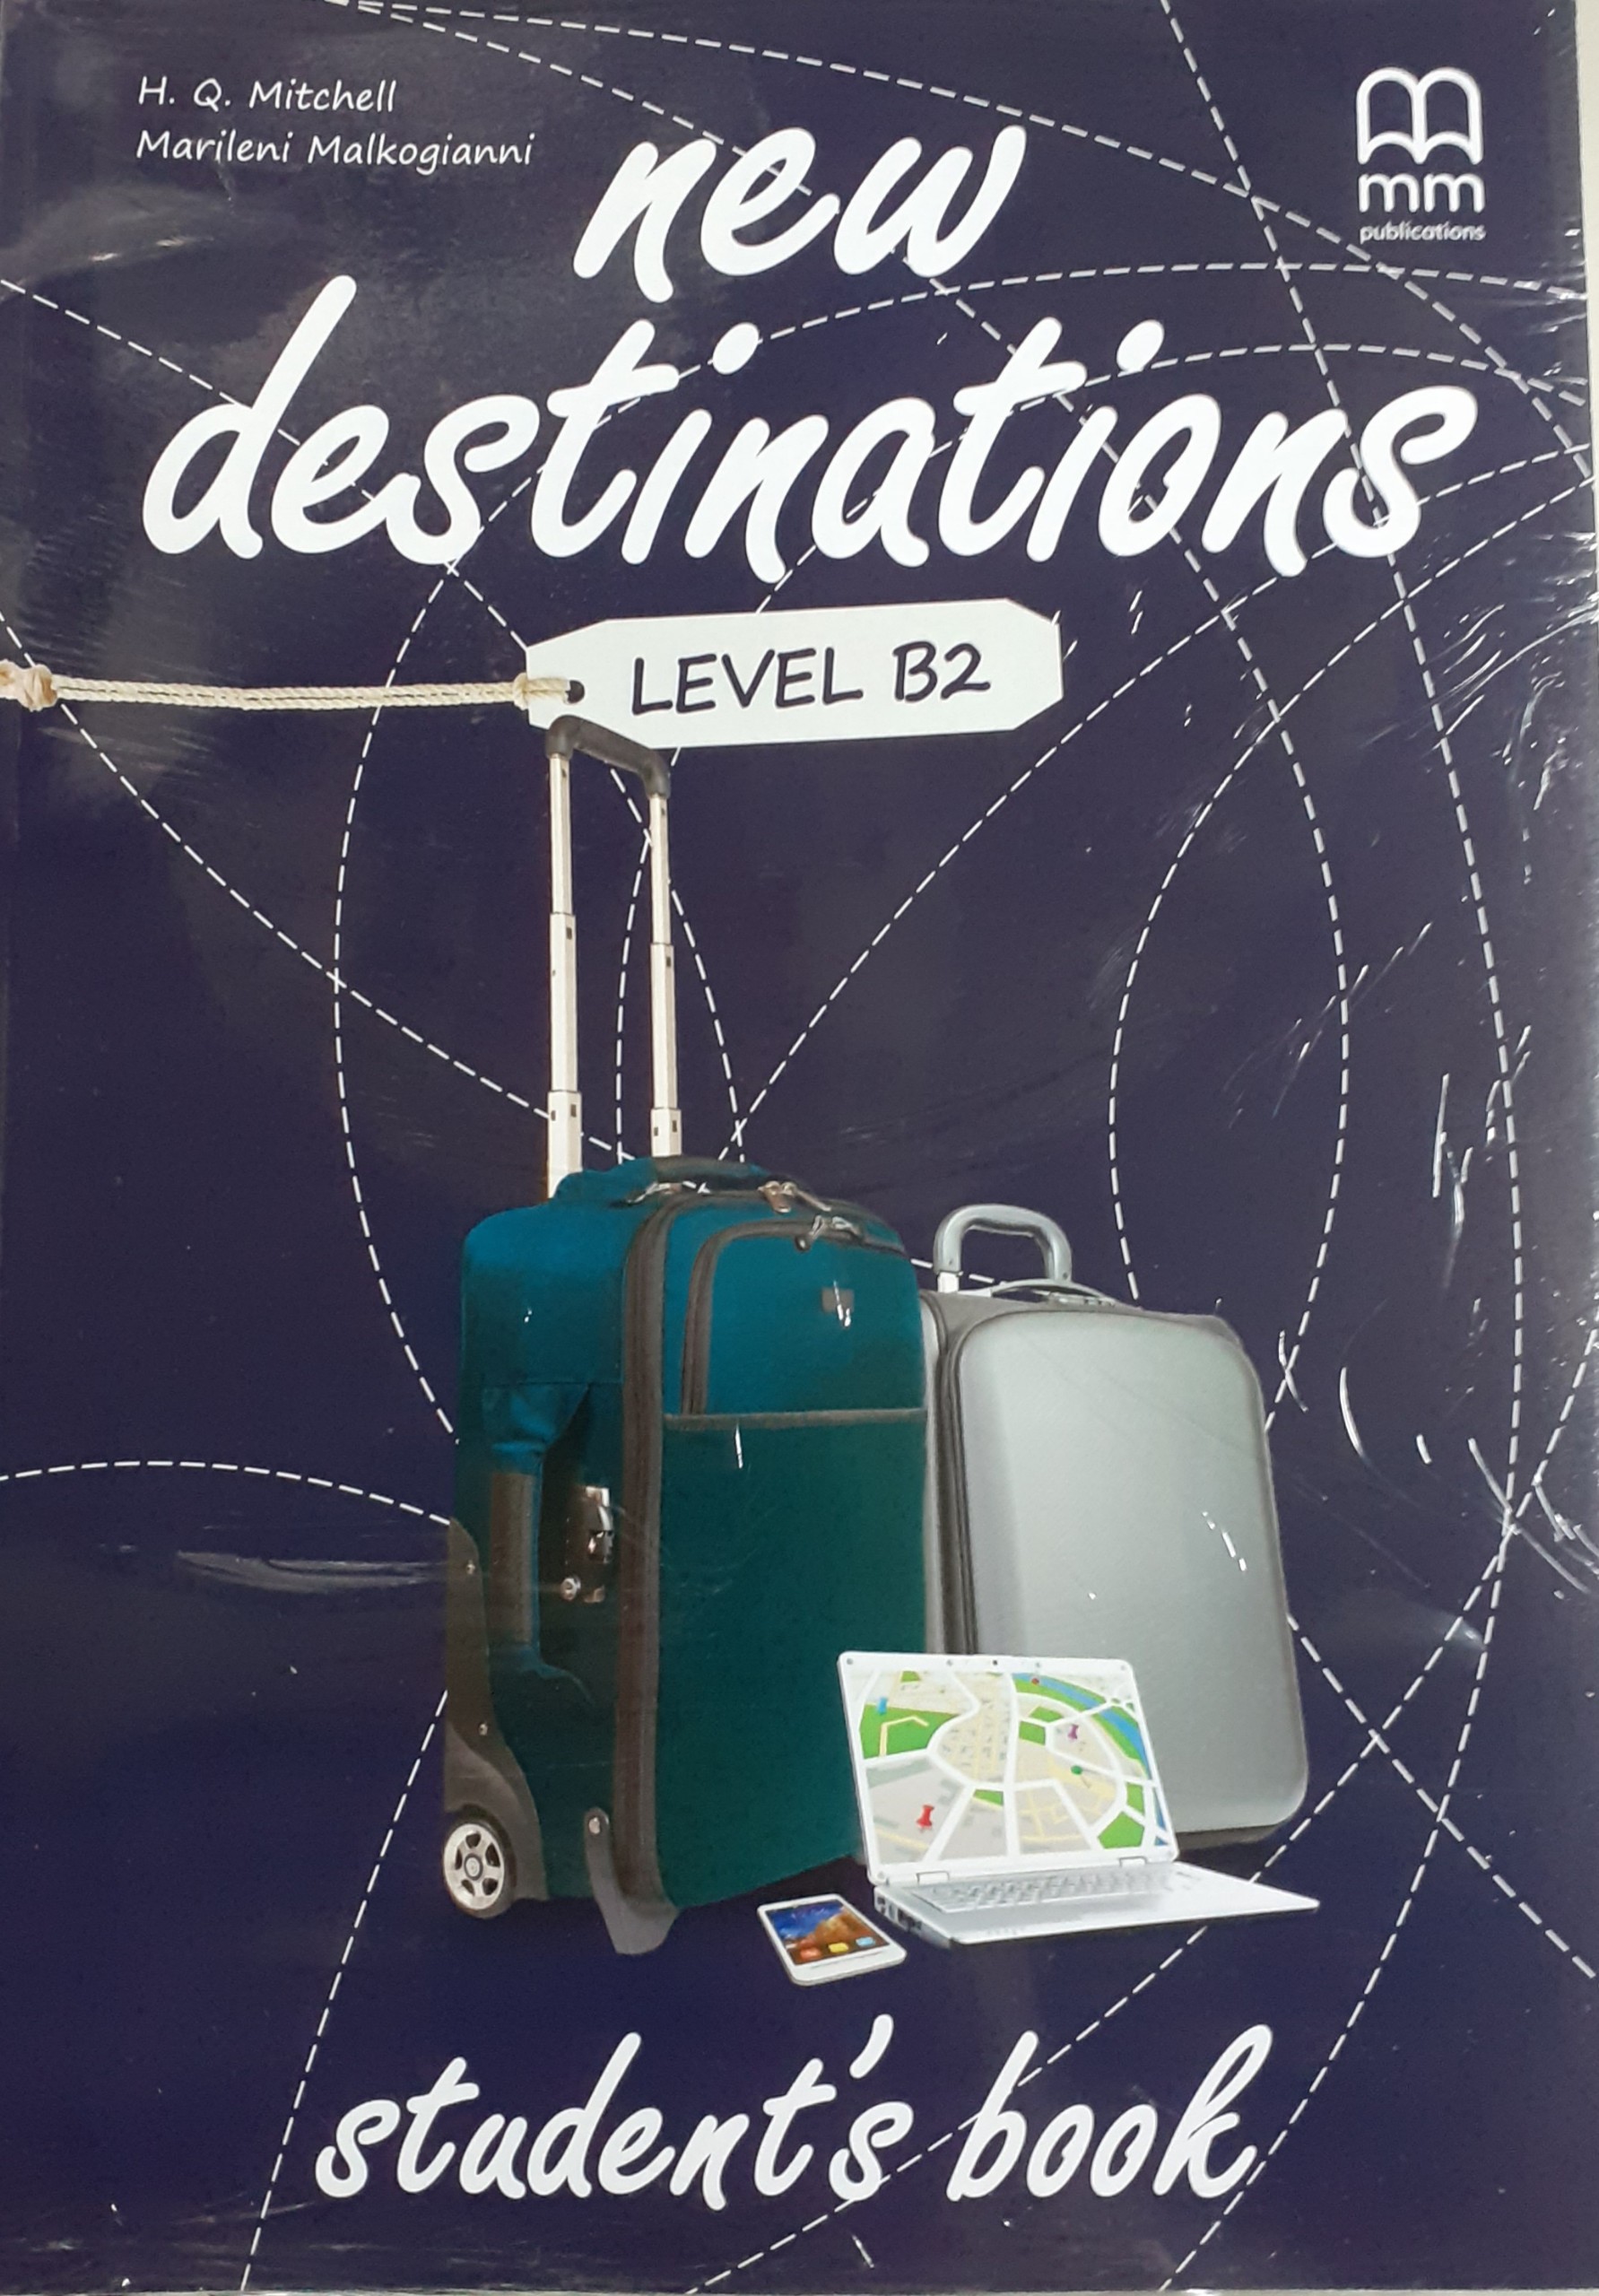 MM Publications: Sách học tiếng Anh - New Destinations Level B2 - Student's Book (British Edition)